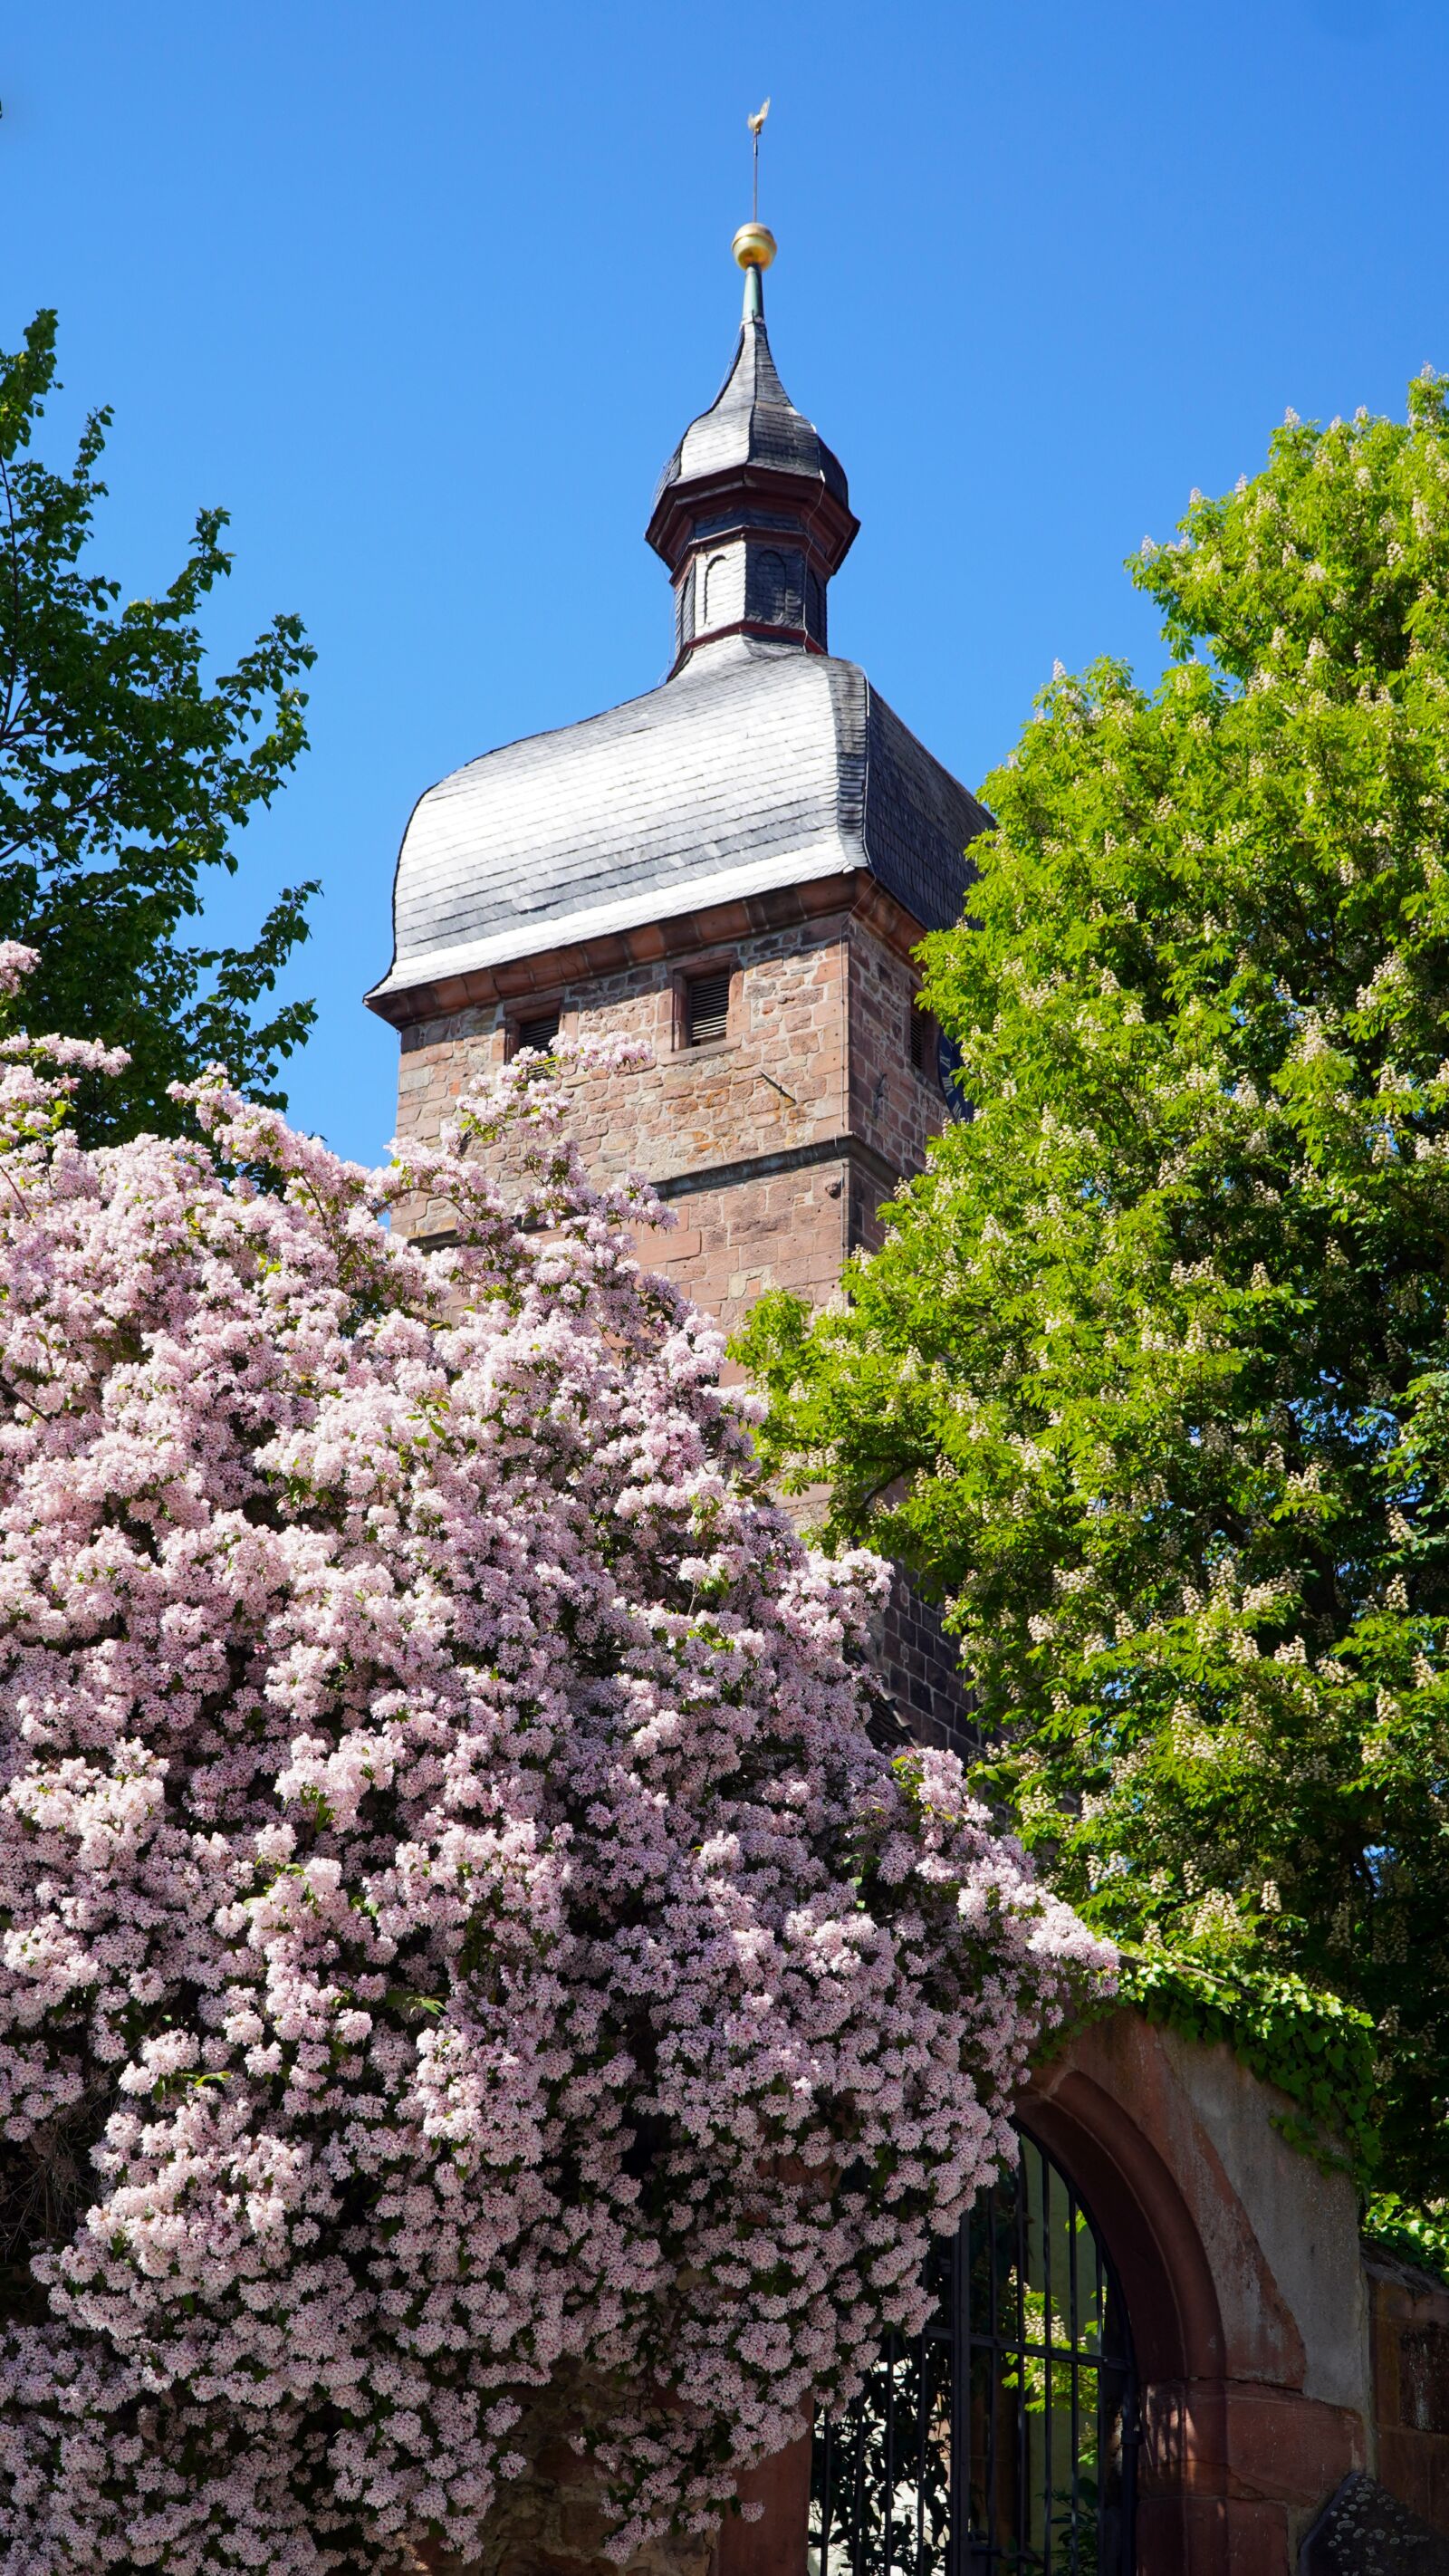 Sony a6400 sample photo. Church, tower, flowers photography